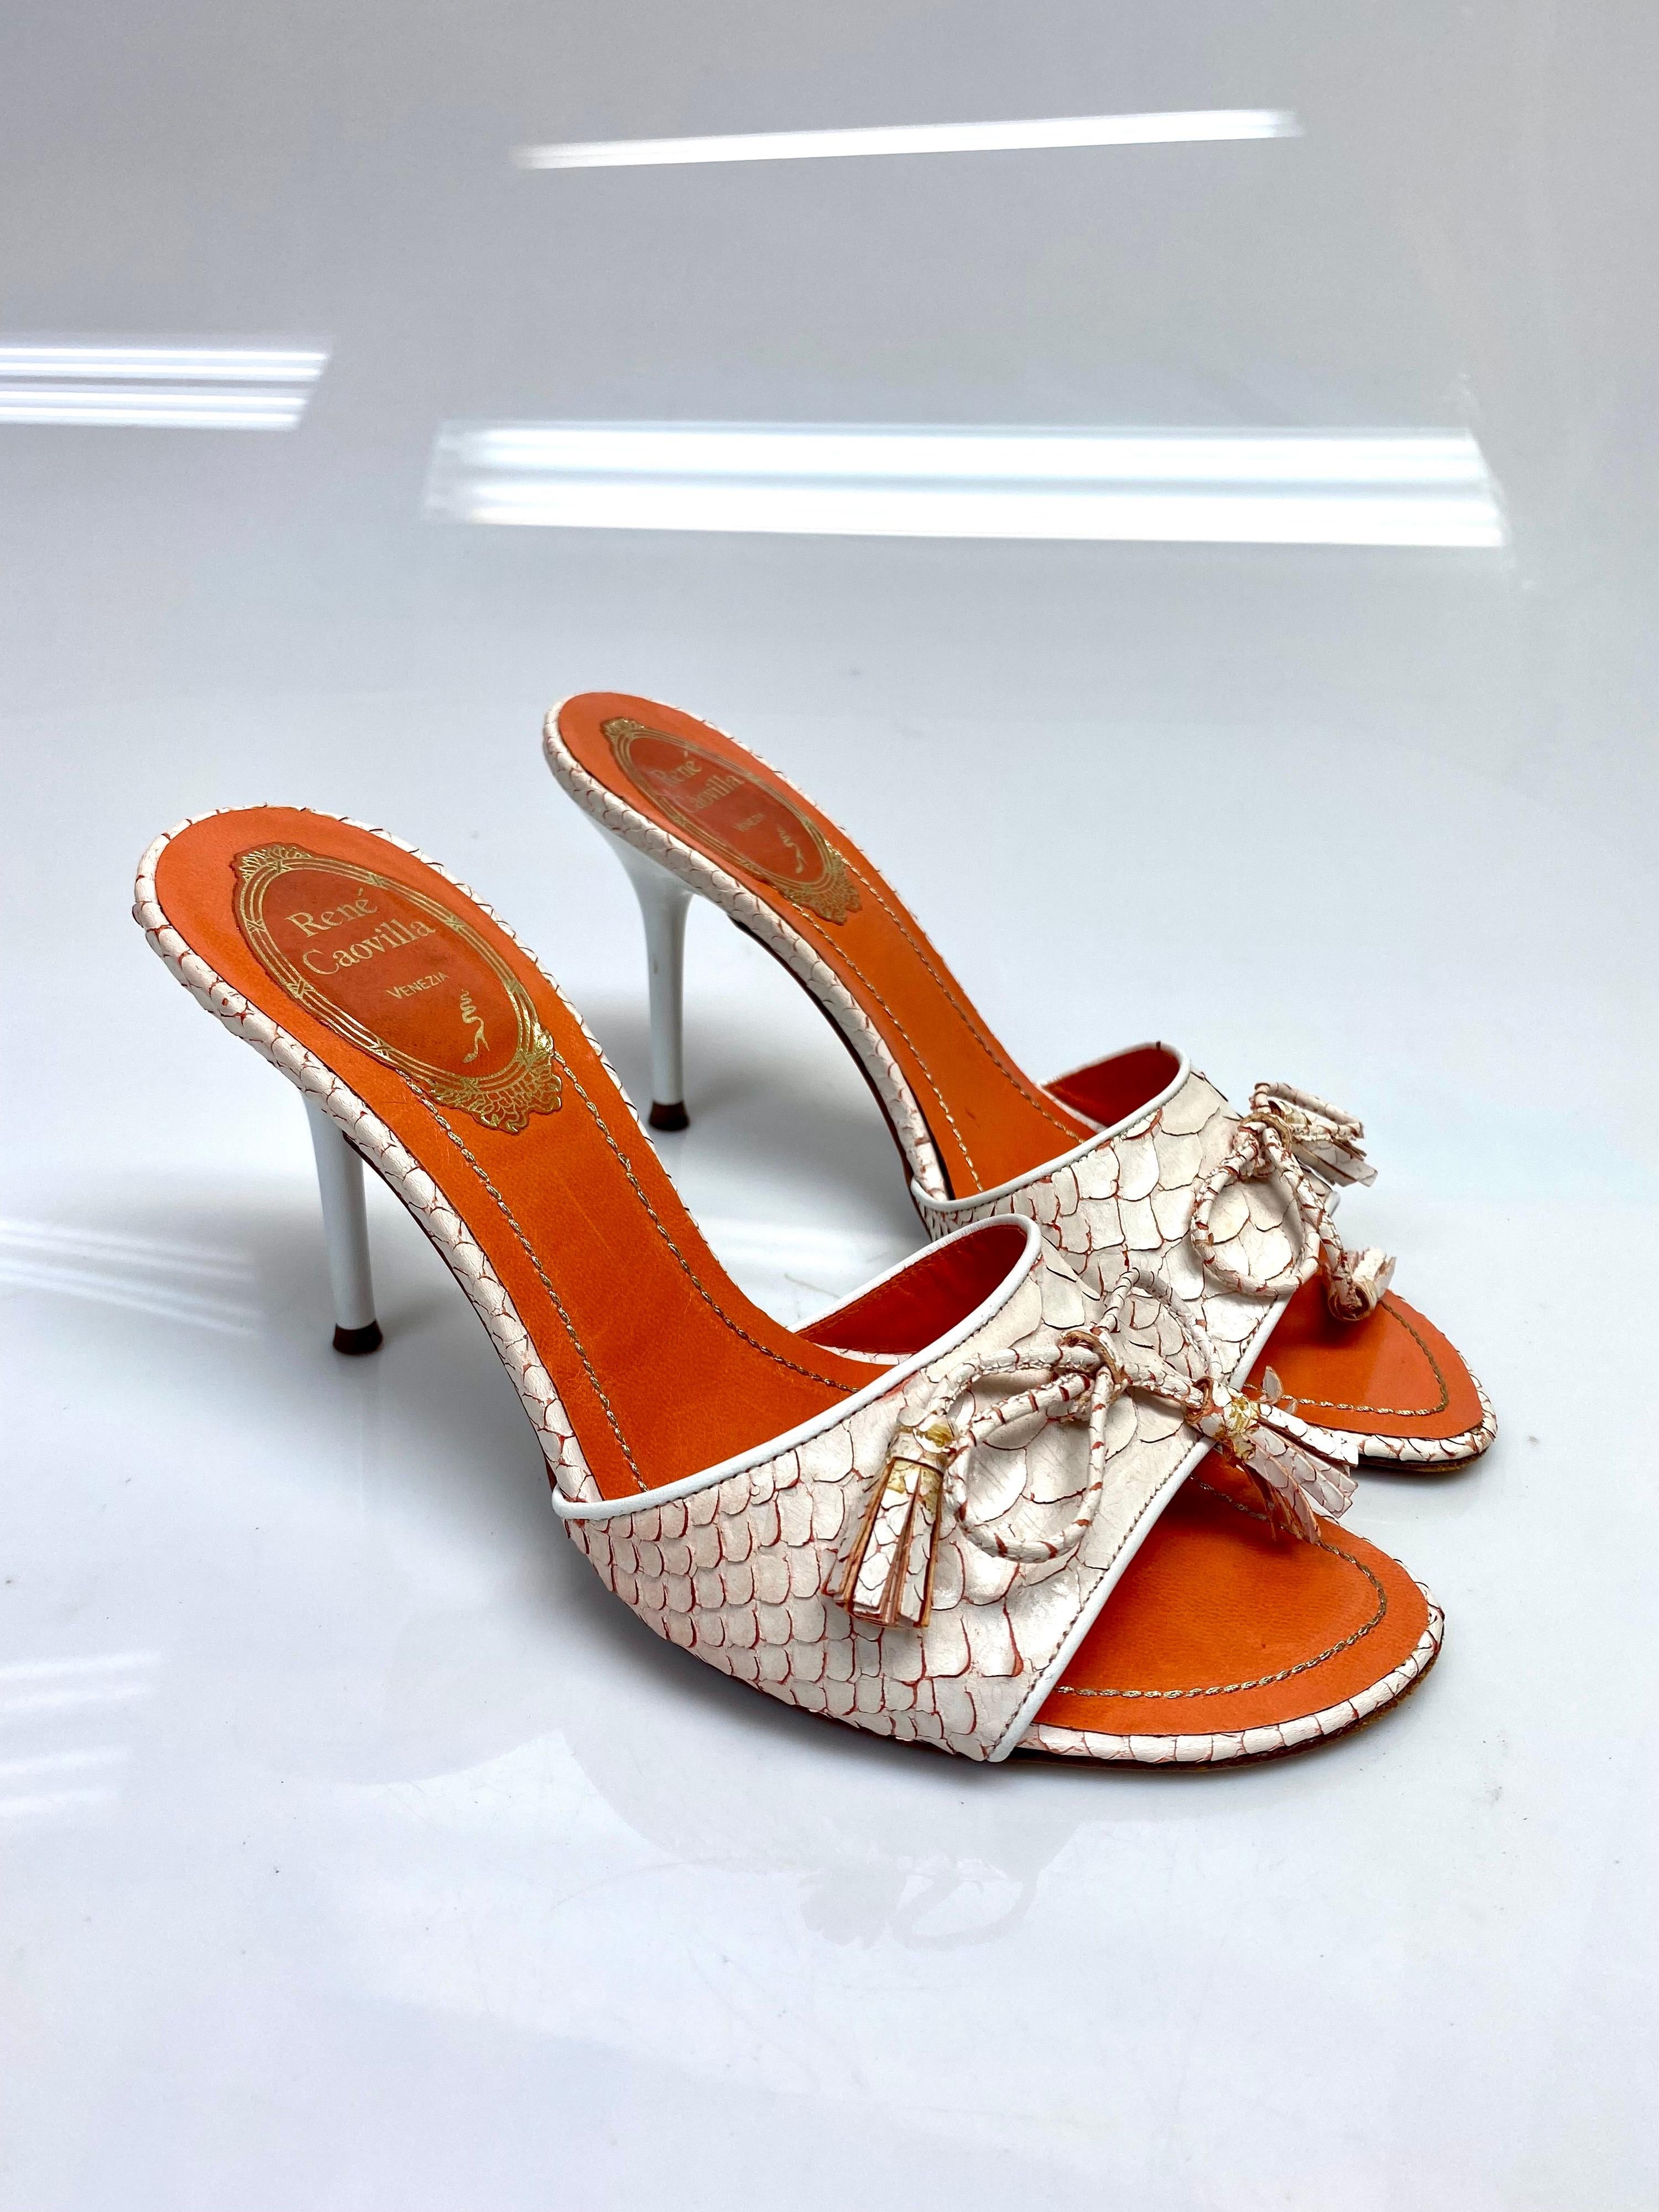 Rene Caovilla Orange Python Peep Toe Heels Size 35. These gorgeous python open toe heels by the iconic Rene Caovilla are an absolute standout. Featuring a bow detail in the front with orange python detailing. Item is in good condition with some